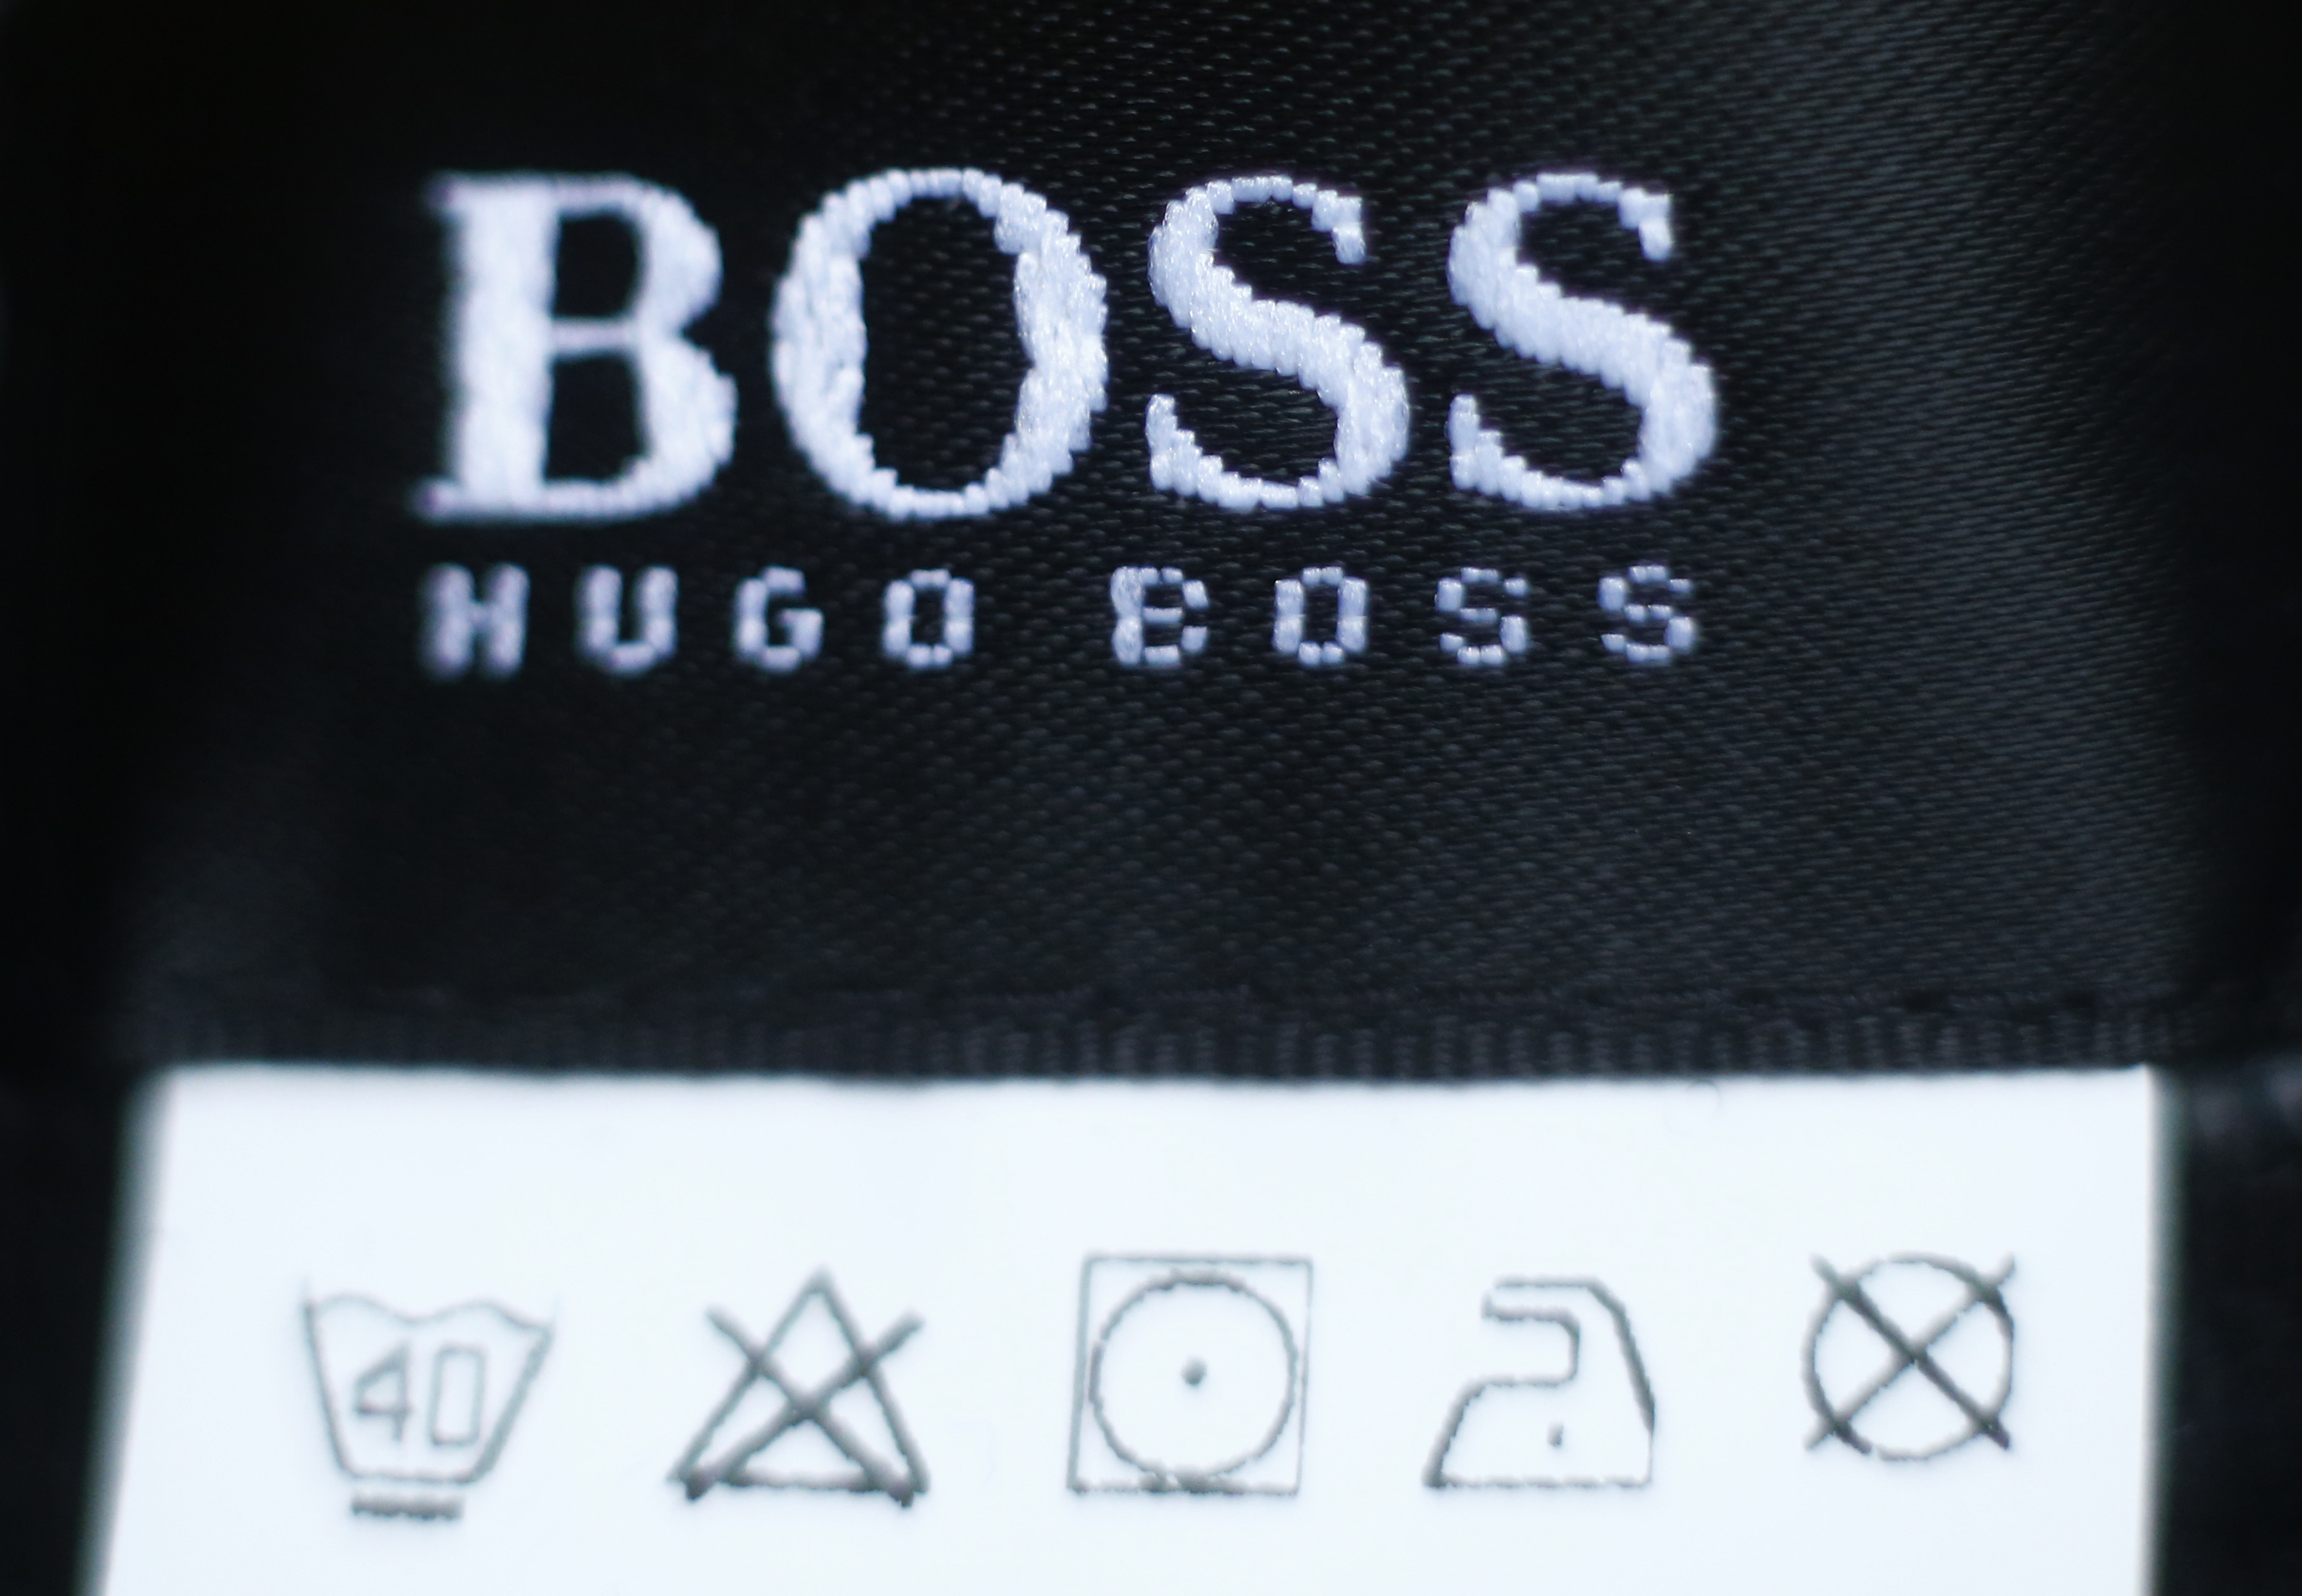 The logo of German fashion house Hugo Boss is seen on a clothing label at their outlet store in Mezingen near Stuttgart